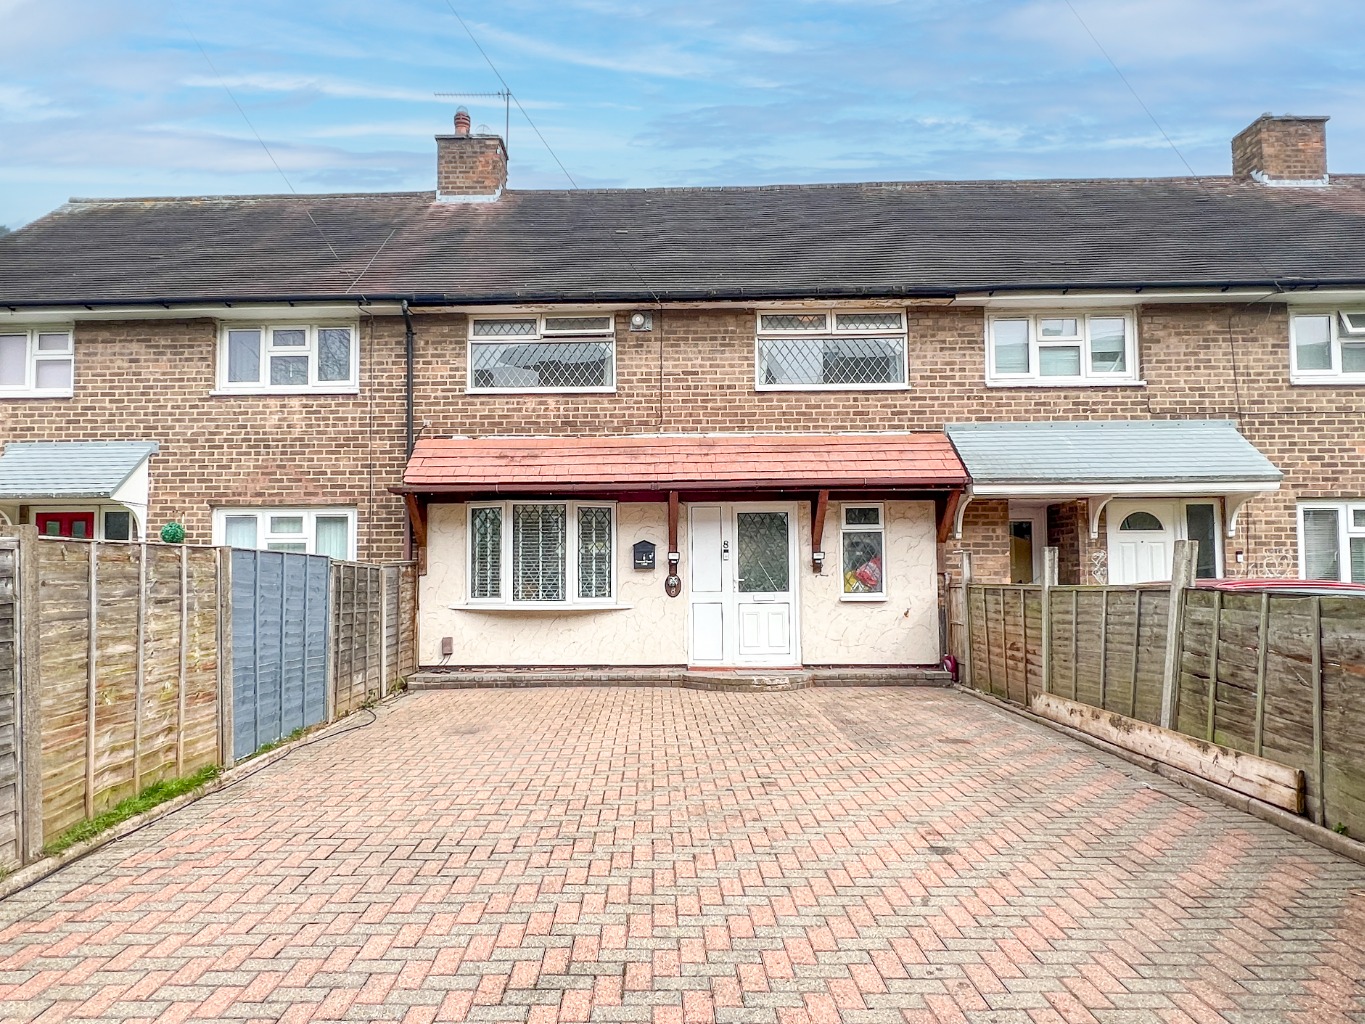 3 bed terraced house for sale in Foxwood Grove, Birmingham - Property Image 1